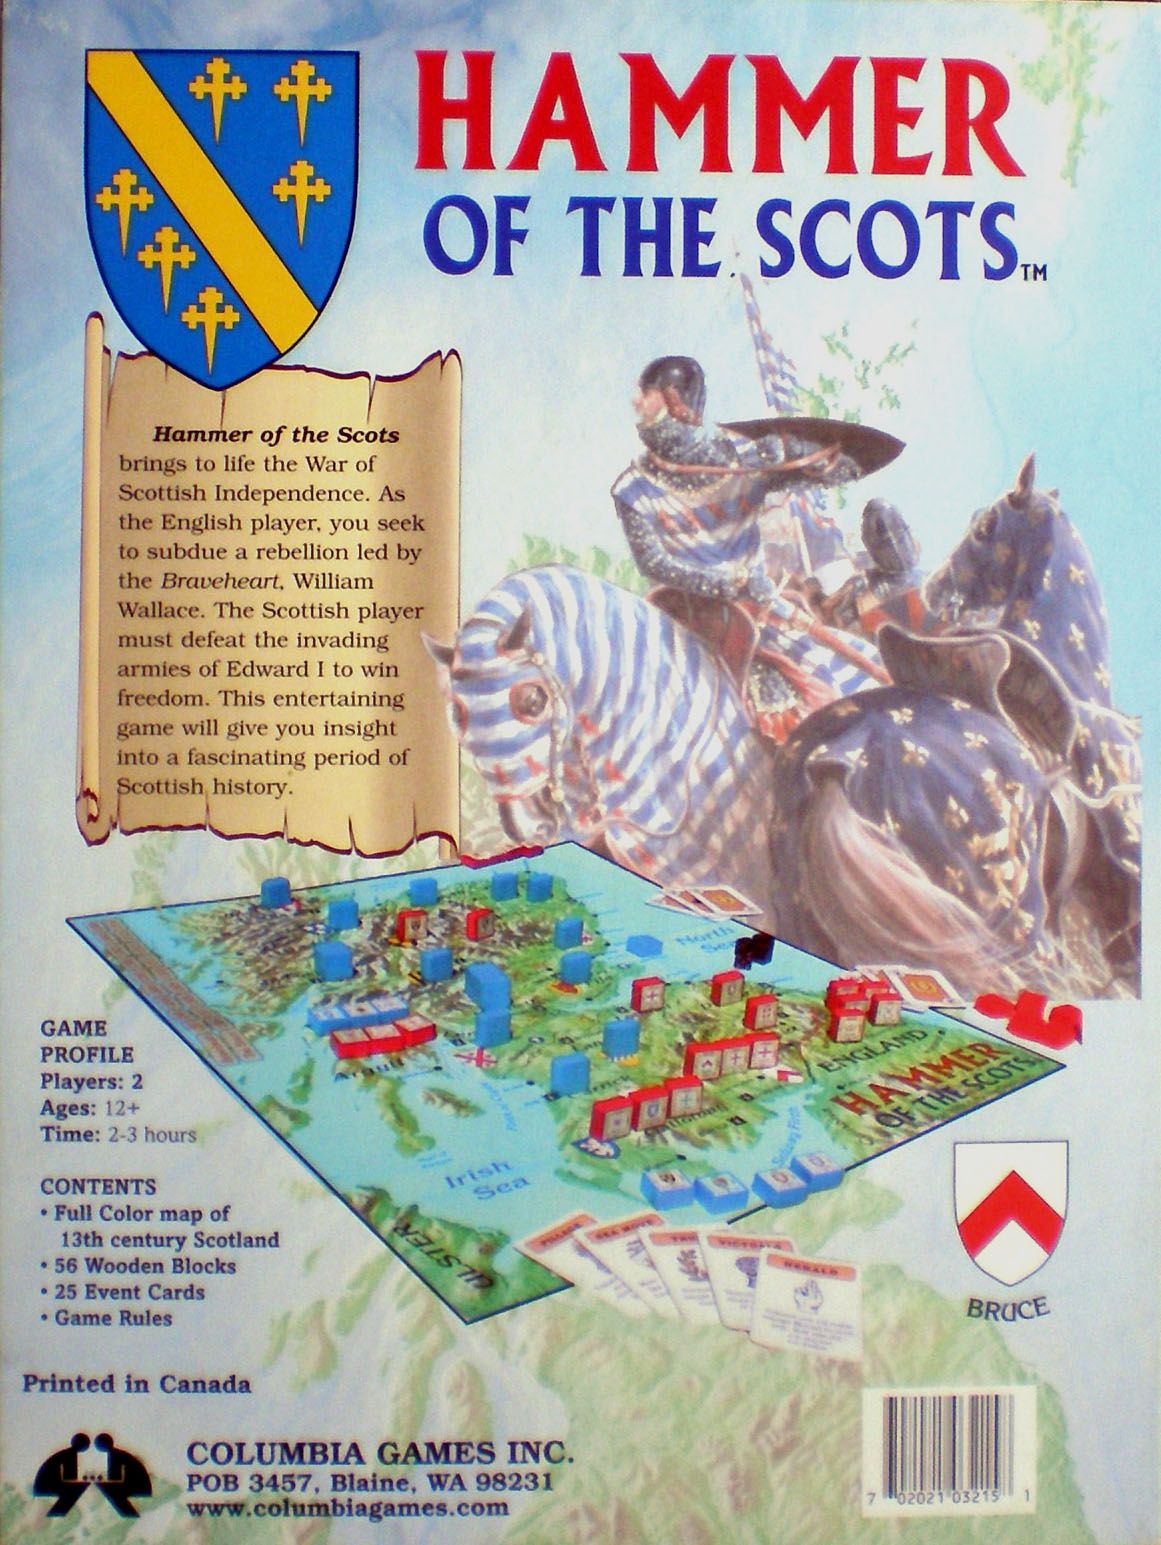 Hammer of the Scots - Second